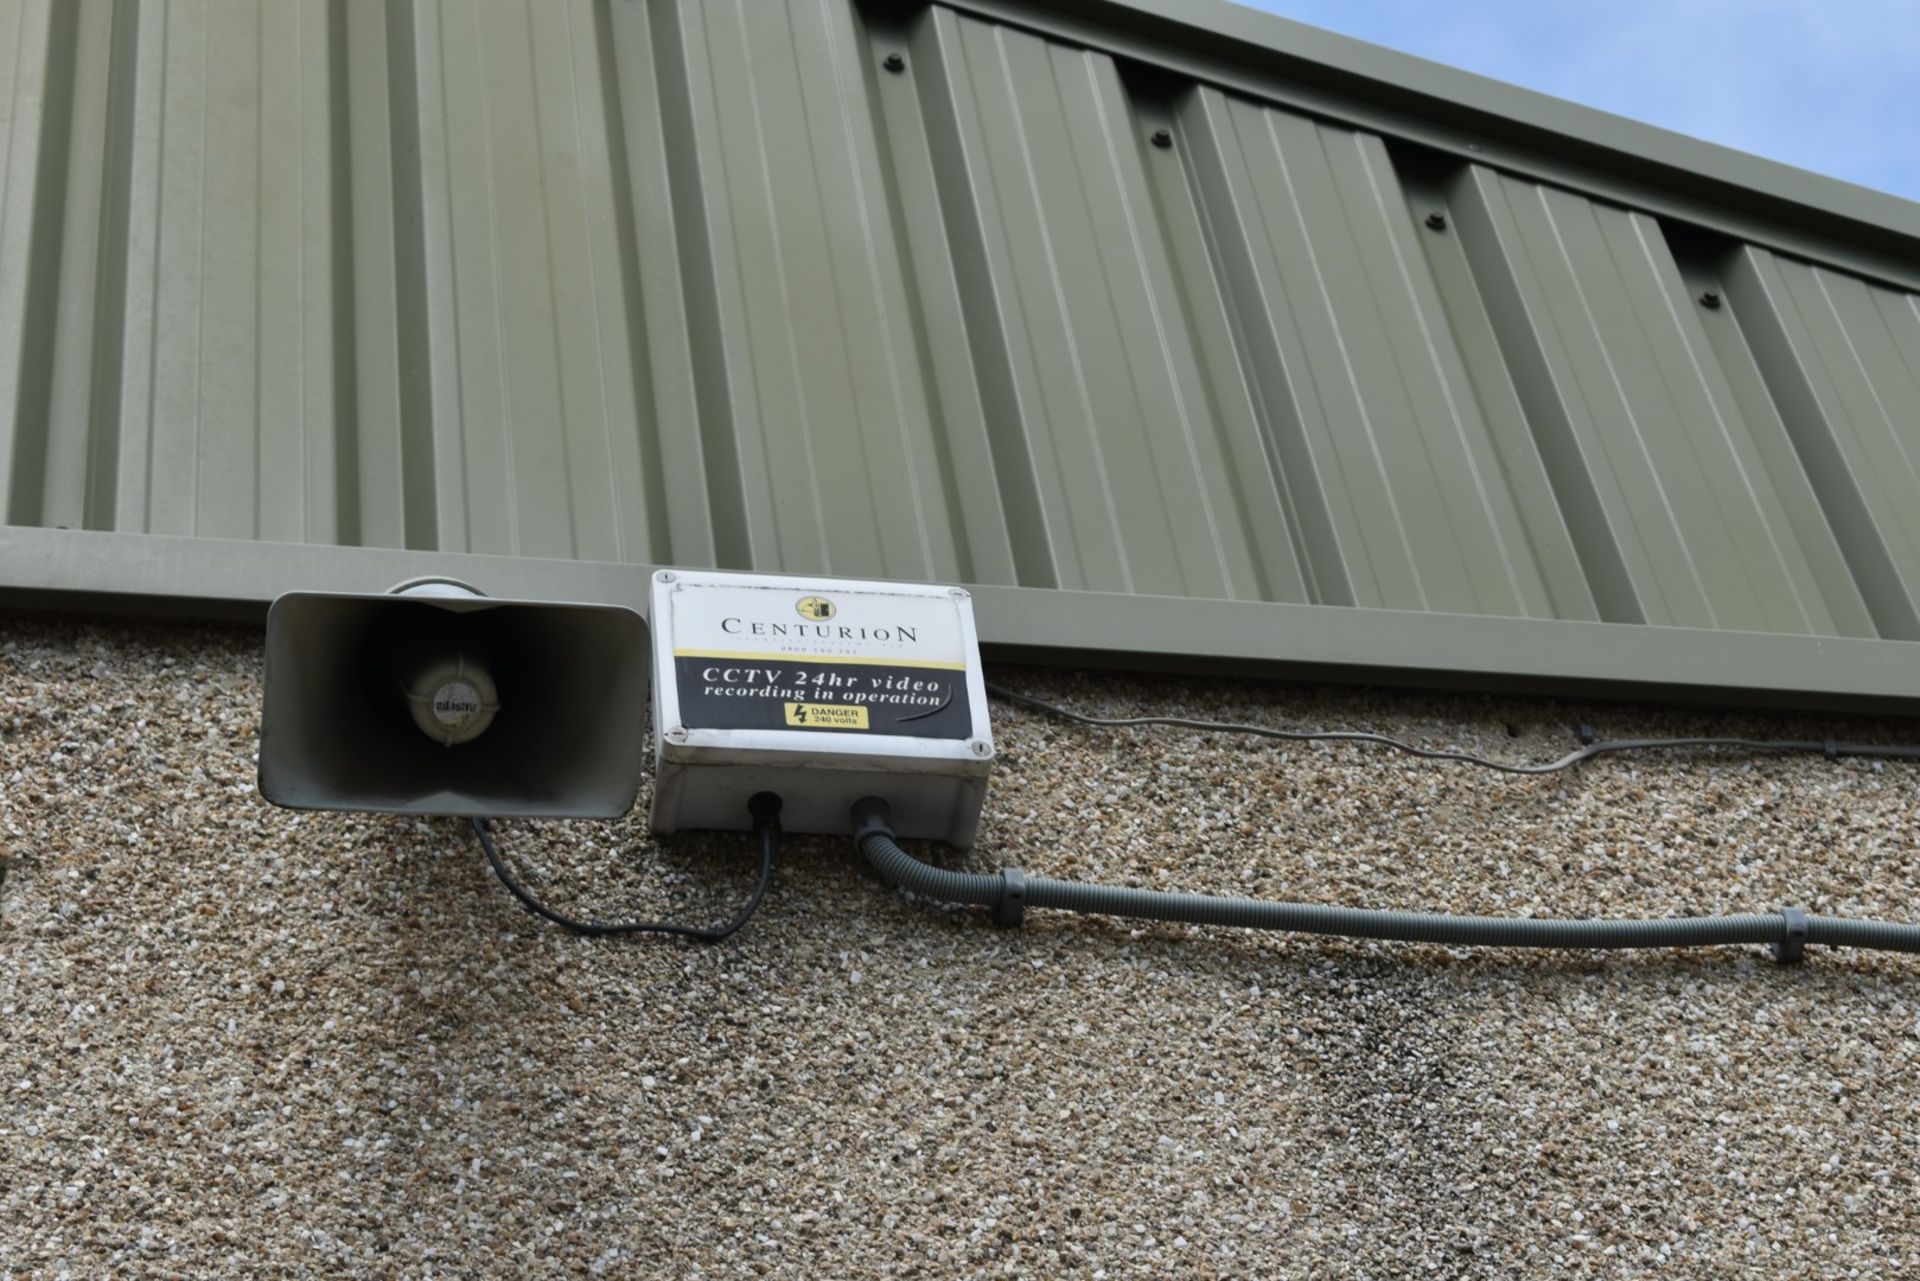 1 x CCTV Security System With Dedicated Micros Recorder, 5 x Centurion Wall Mounted Cameras and 2 - Image 6 of 14